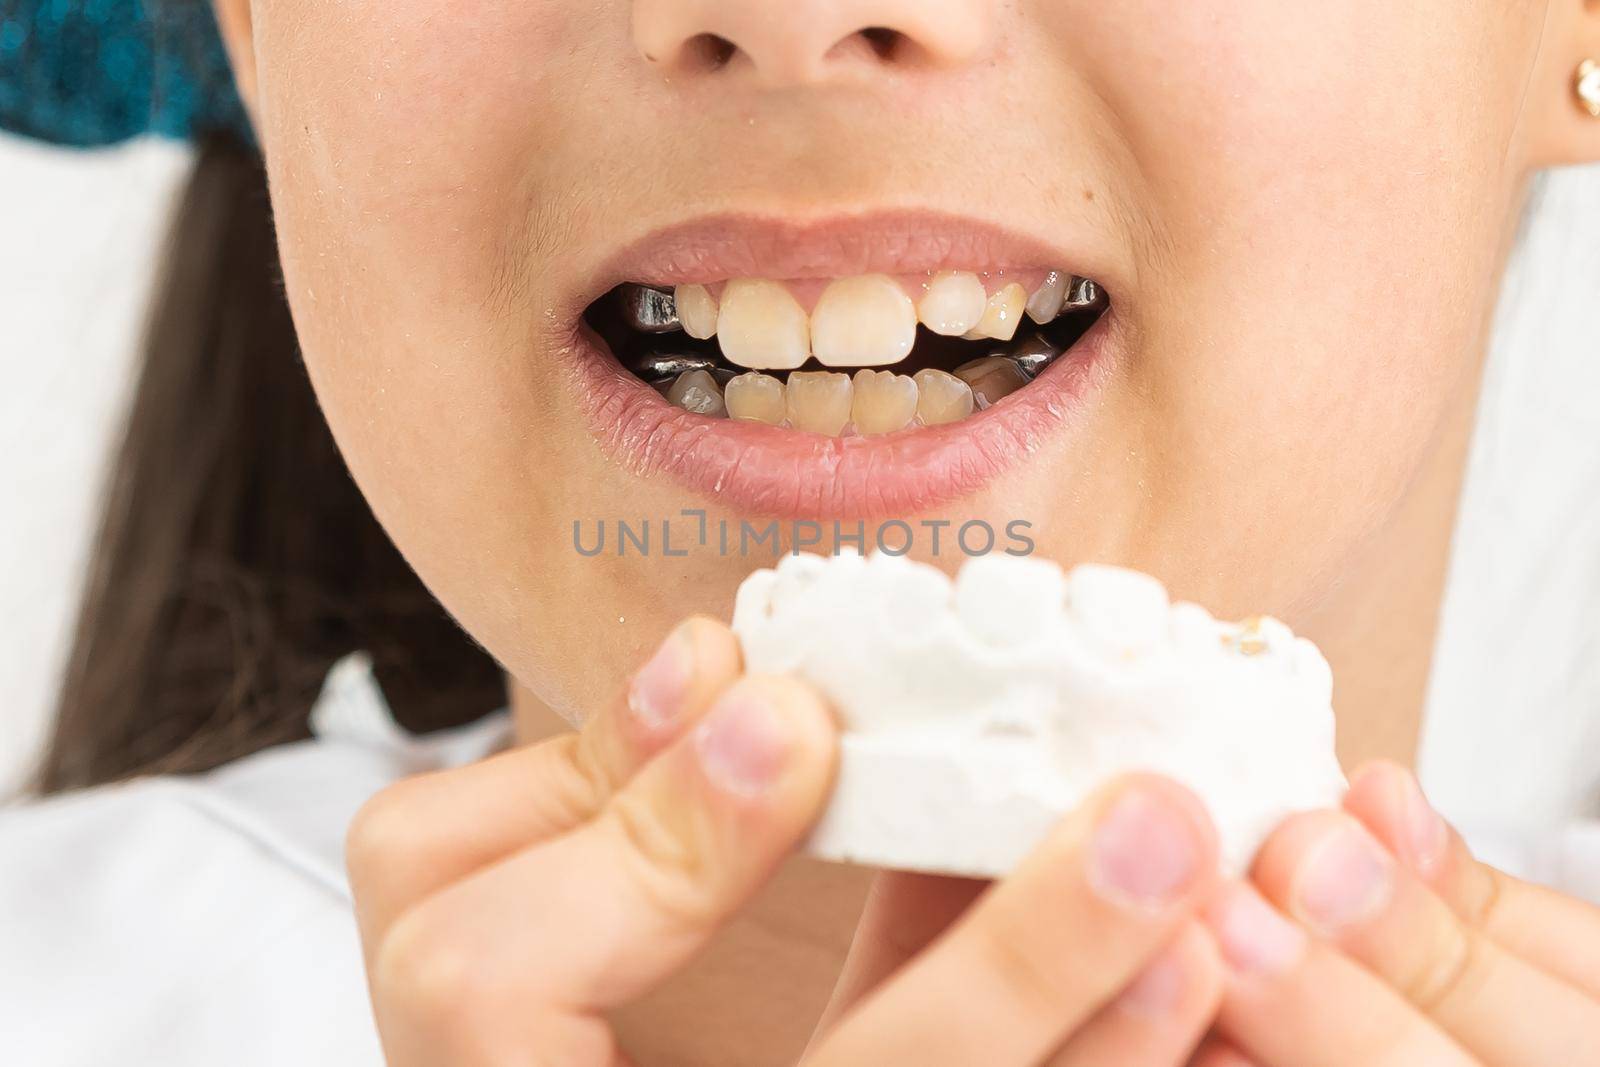 Teenager is holding a dental cast model at the start of orthodontic treatment alongside her teeth after the treatment was completed. by Andelov13